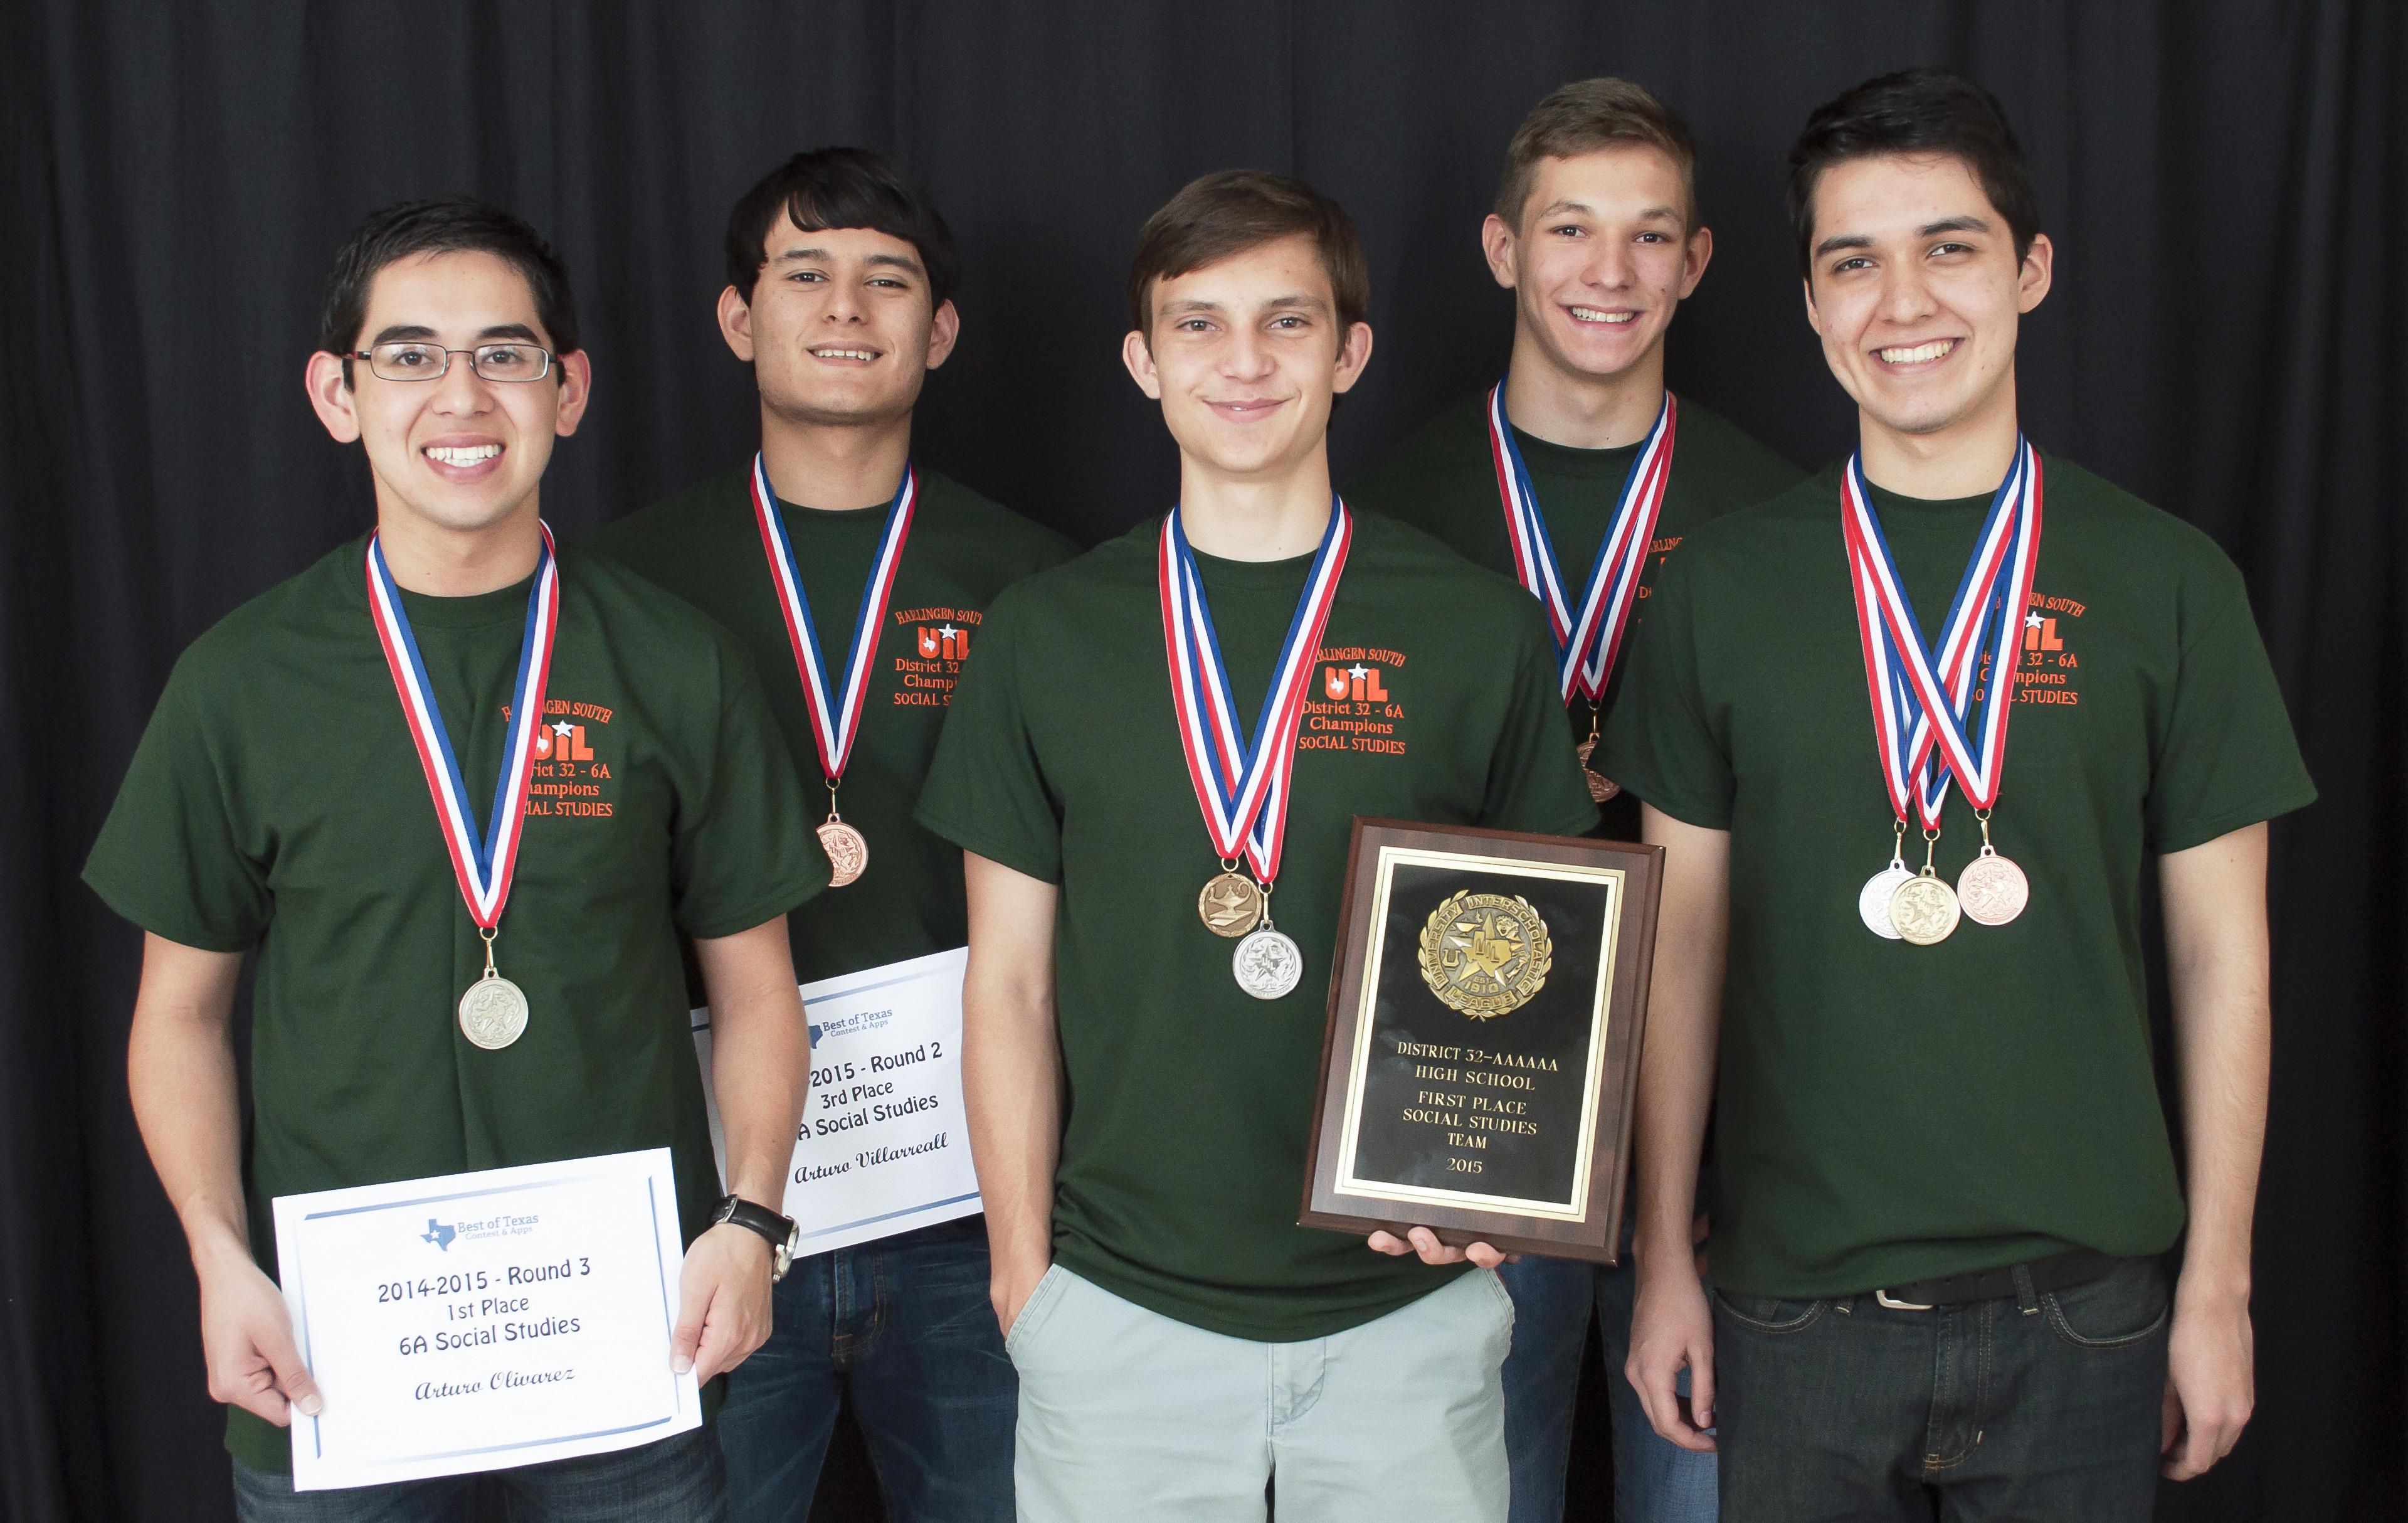 South UIL Social Studies Team wins big at Best of Texas Tournament